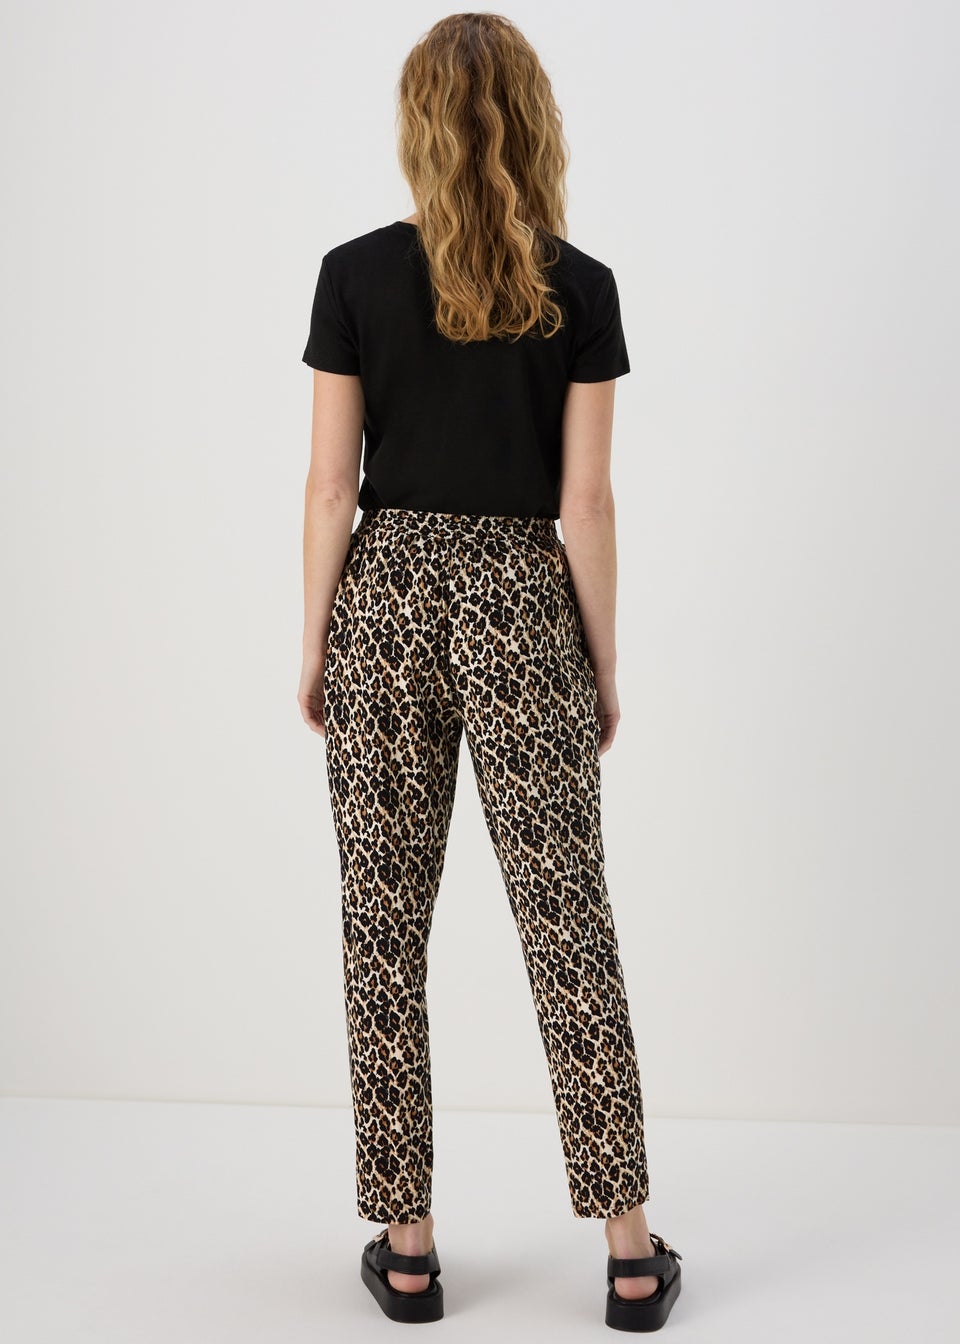 Lightweight, casual print trousers